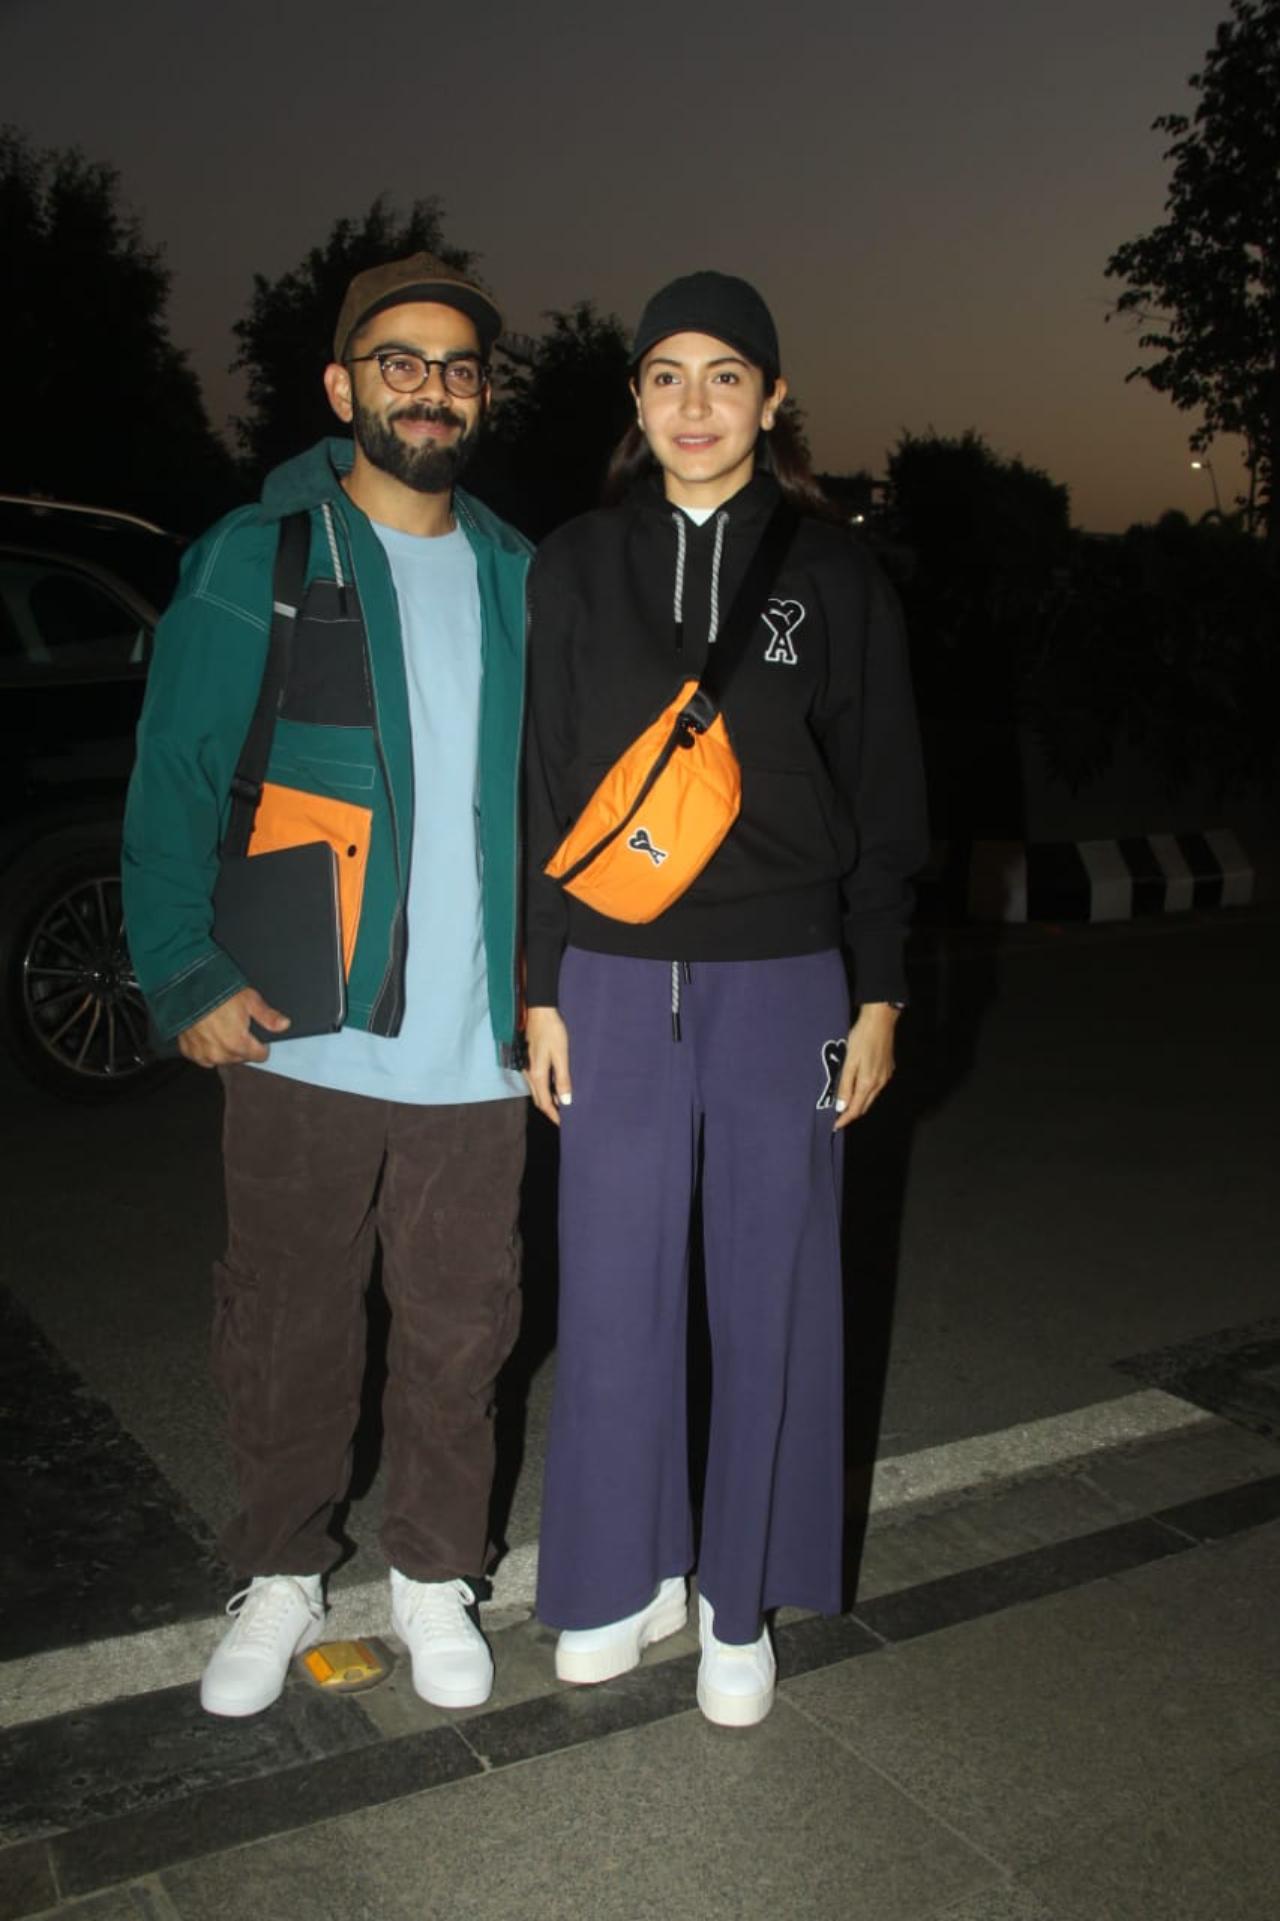 Early on Tuesday morning, Virat Kohli and Anushka Sharma were spotted together at the Mumbai airport. They were seen in comfortable casuals as they made their way to the airport